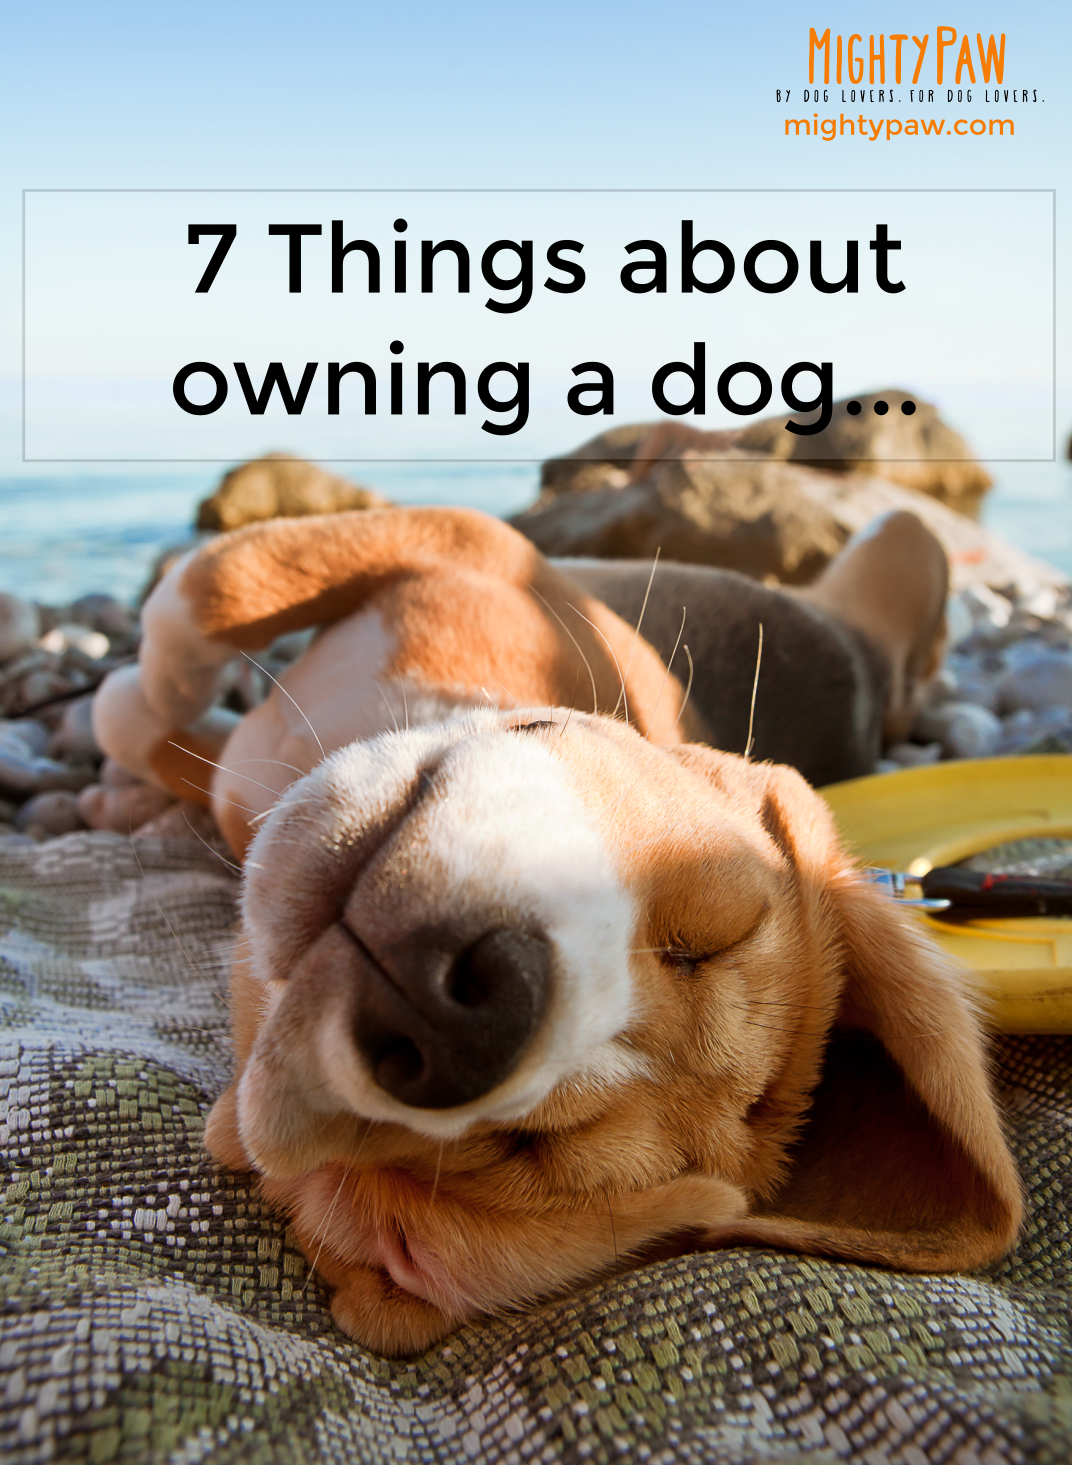 7 Things about owning a dog…